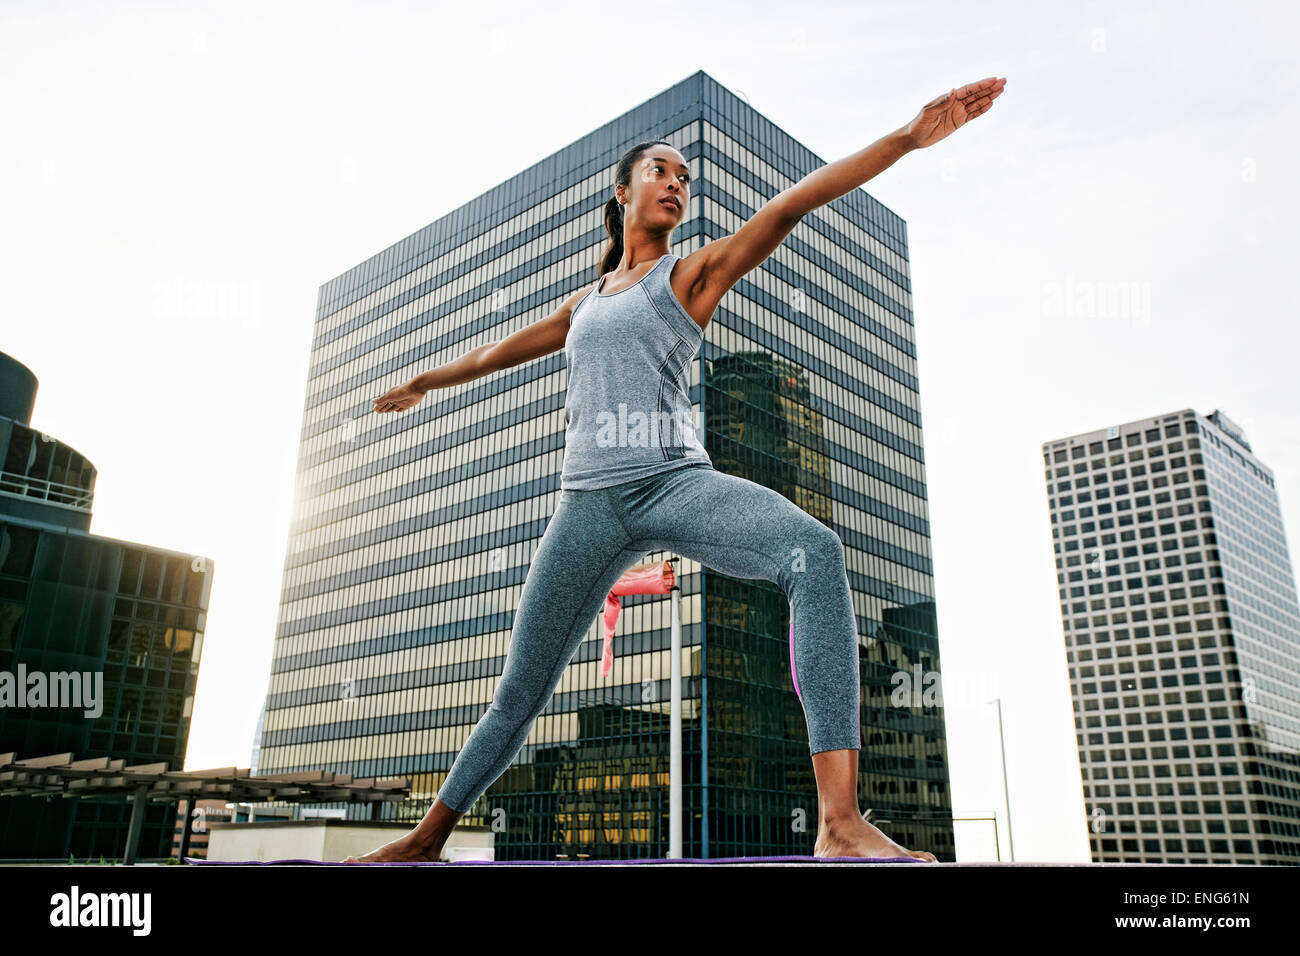 African American woman practicing yoga on urban rooftop Stock Photo